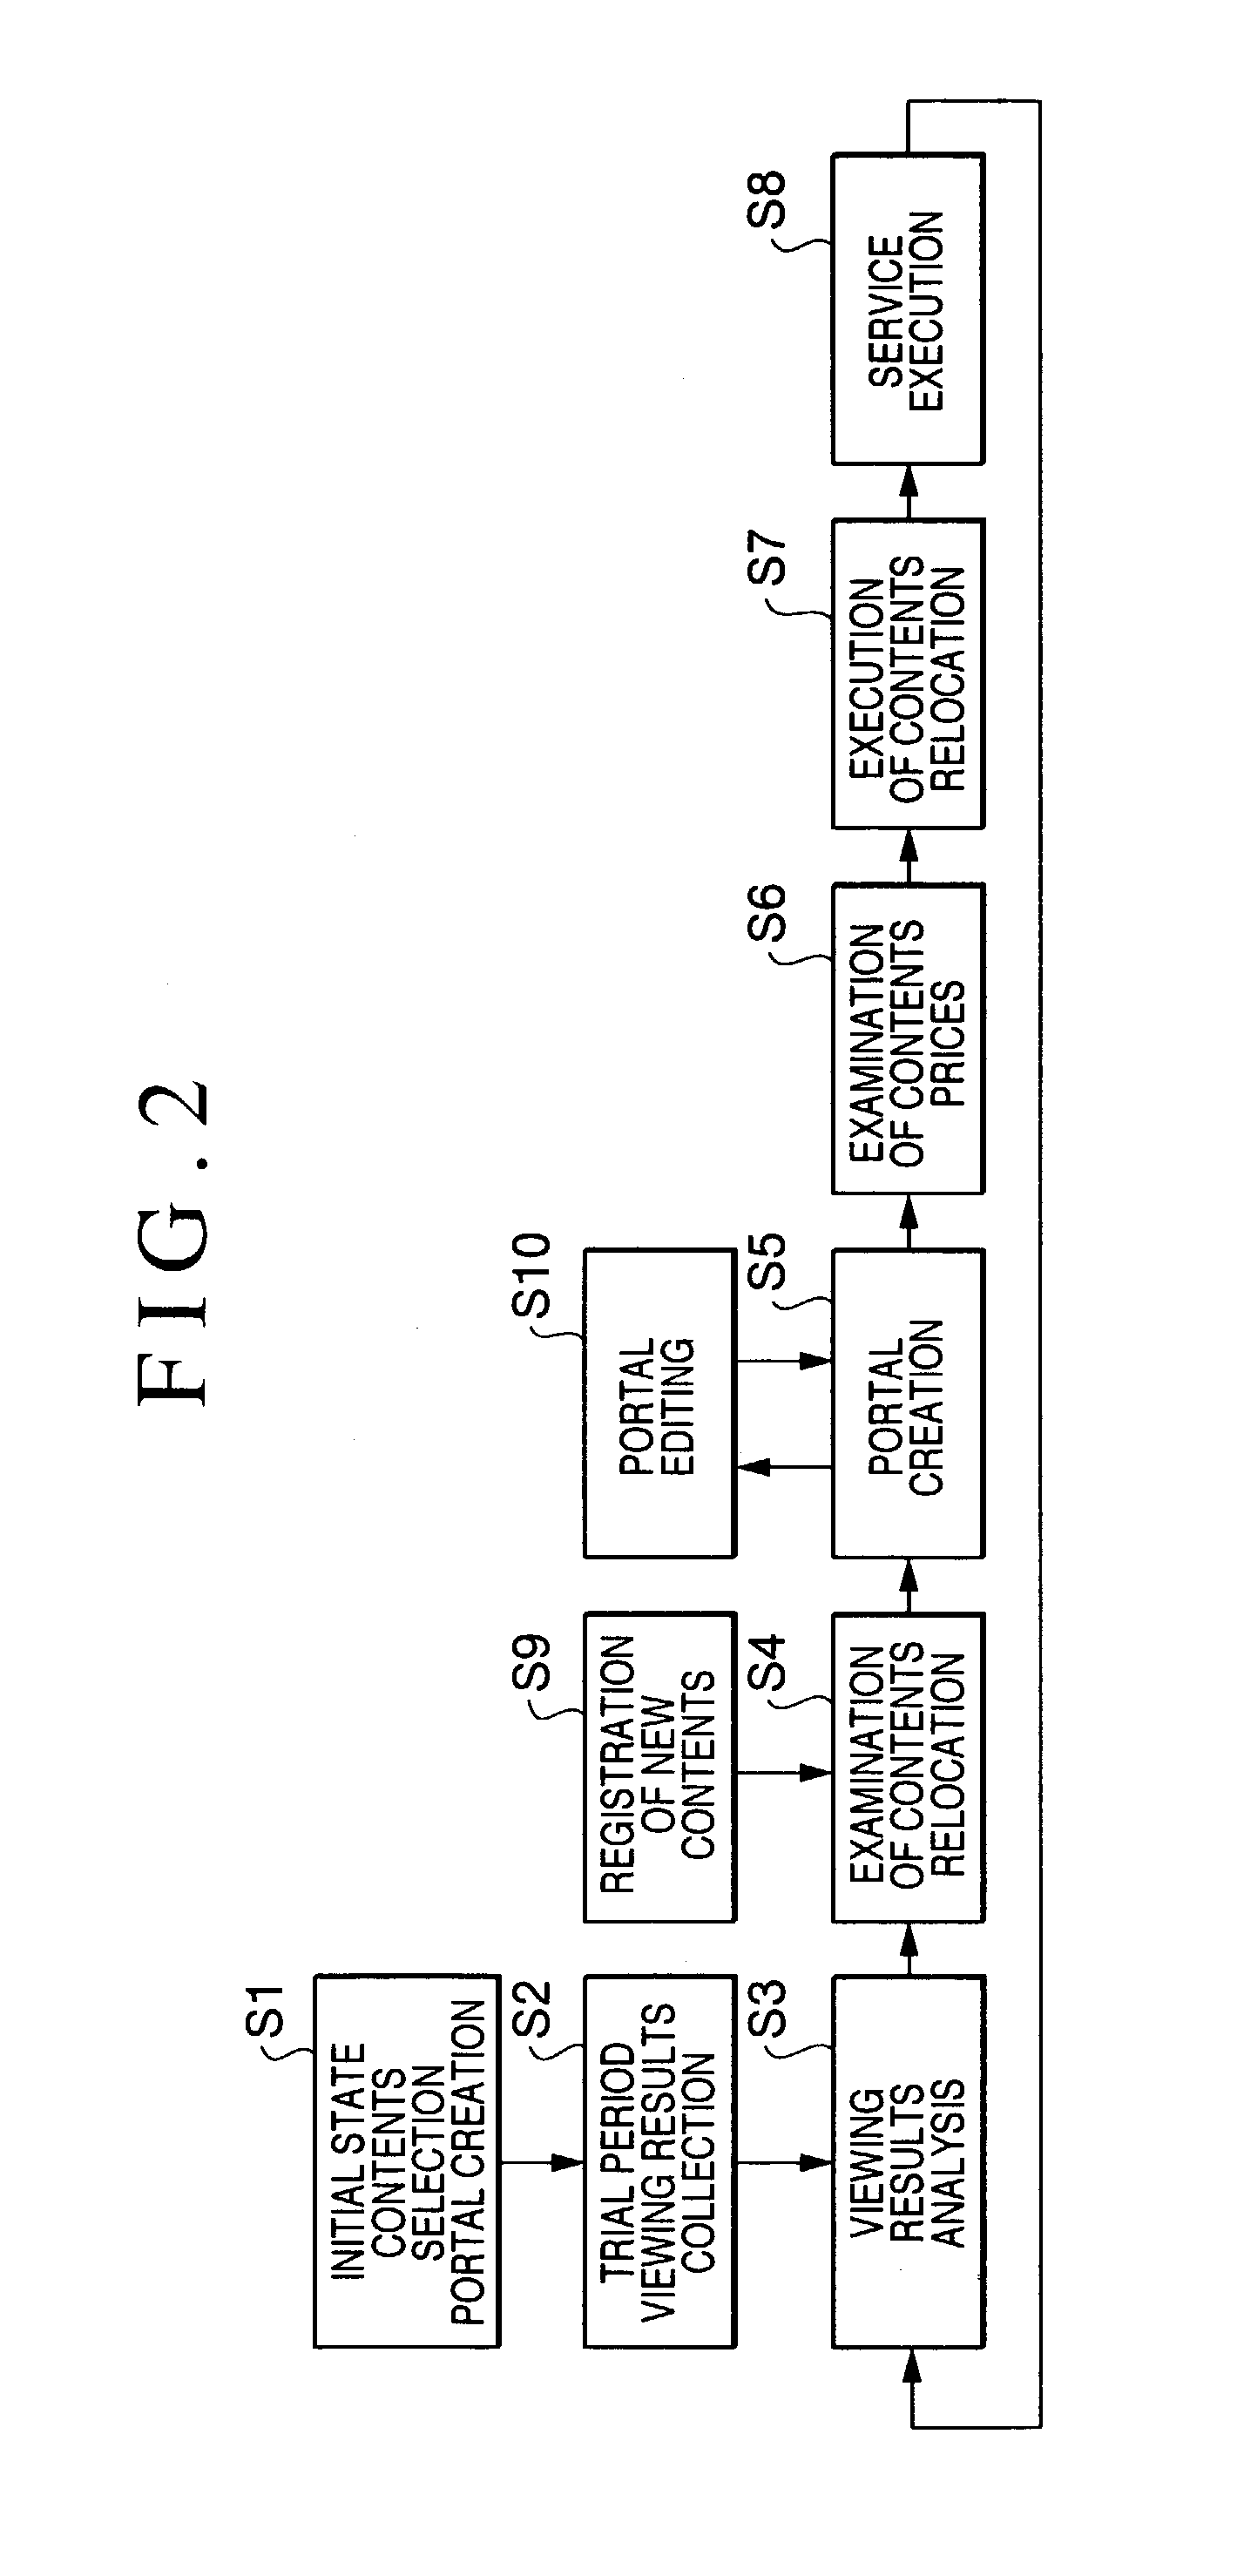 Content delivery system for dynamically and optimally relocates contents to archive server, edge servers and terminal storage devices based on users' viewing tendency